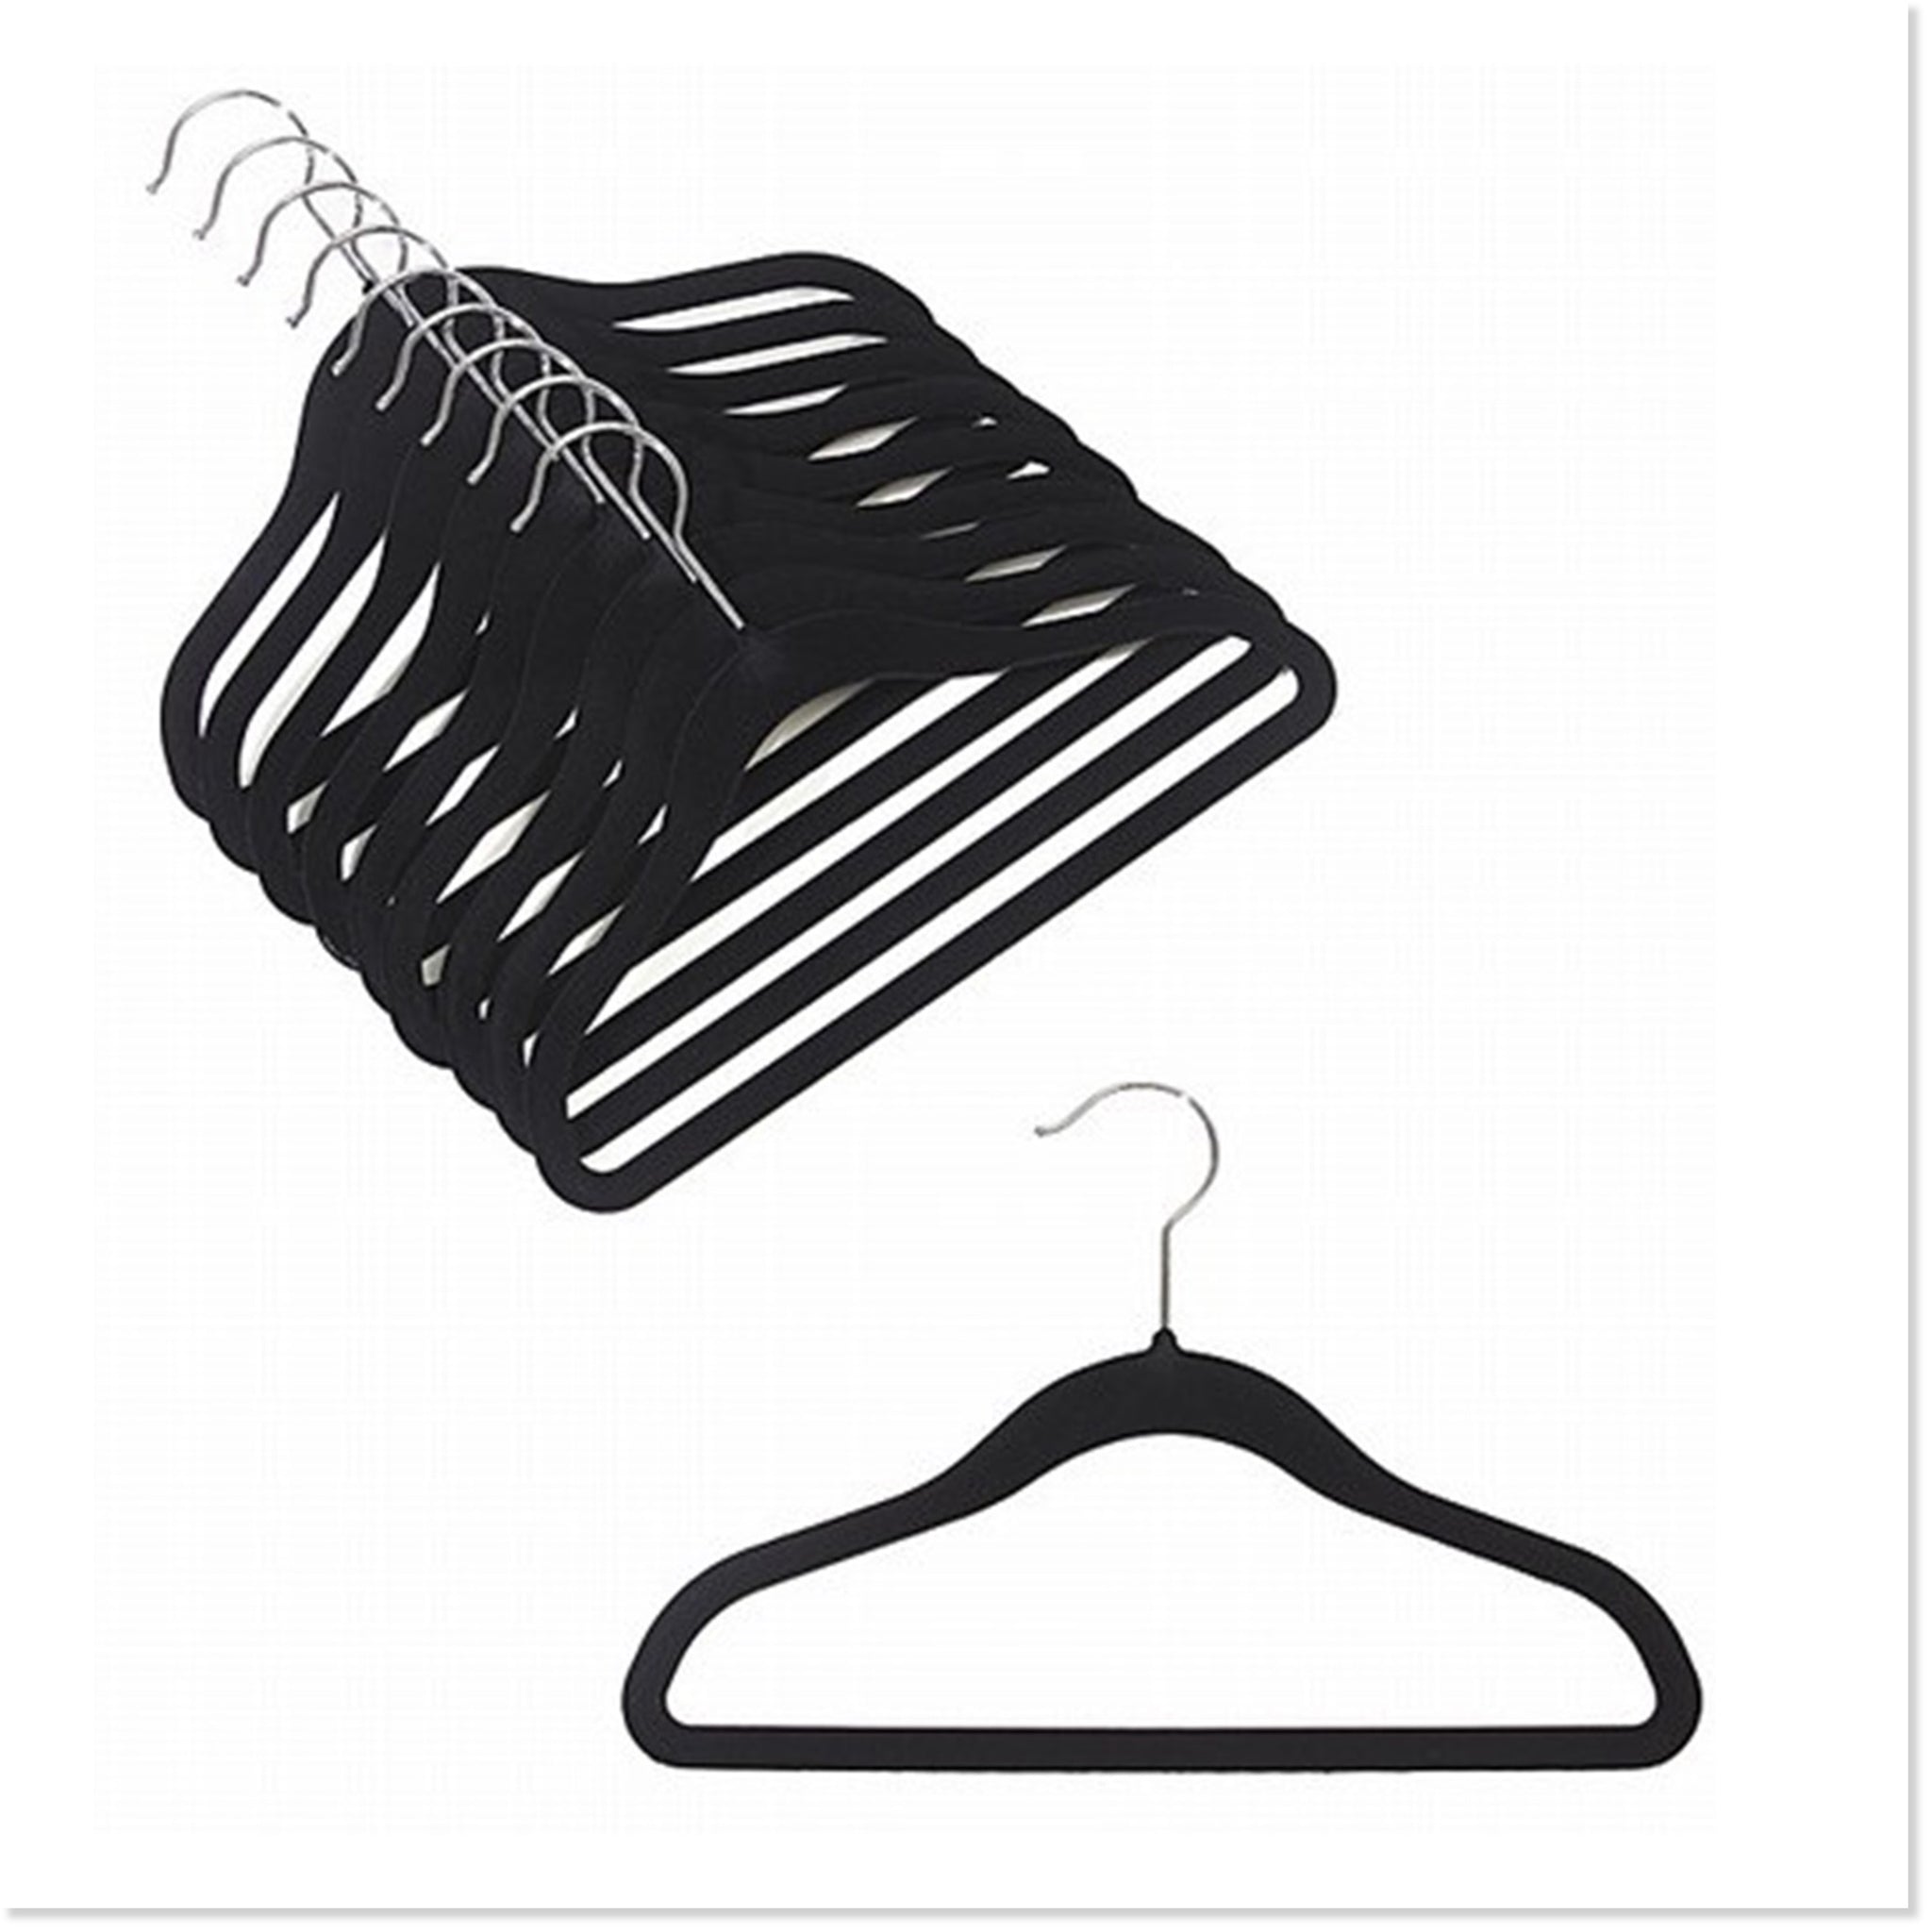 Space-Saving Set of 10 Hangers - Color - Pink - Brand -Room for Life